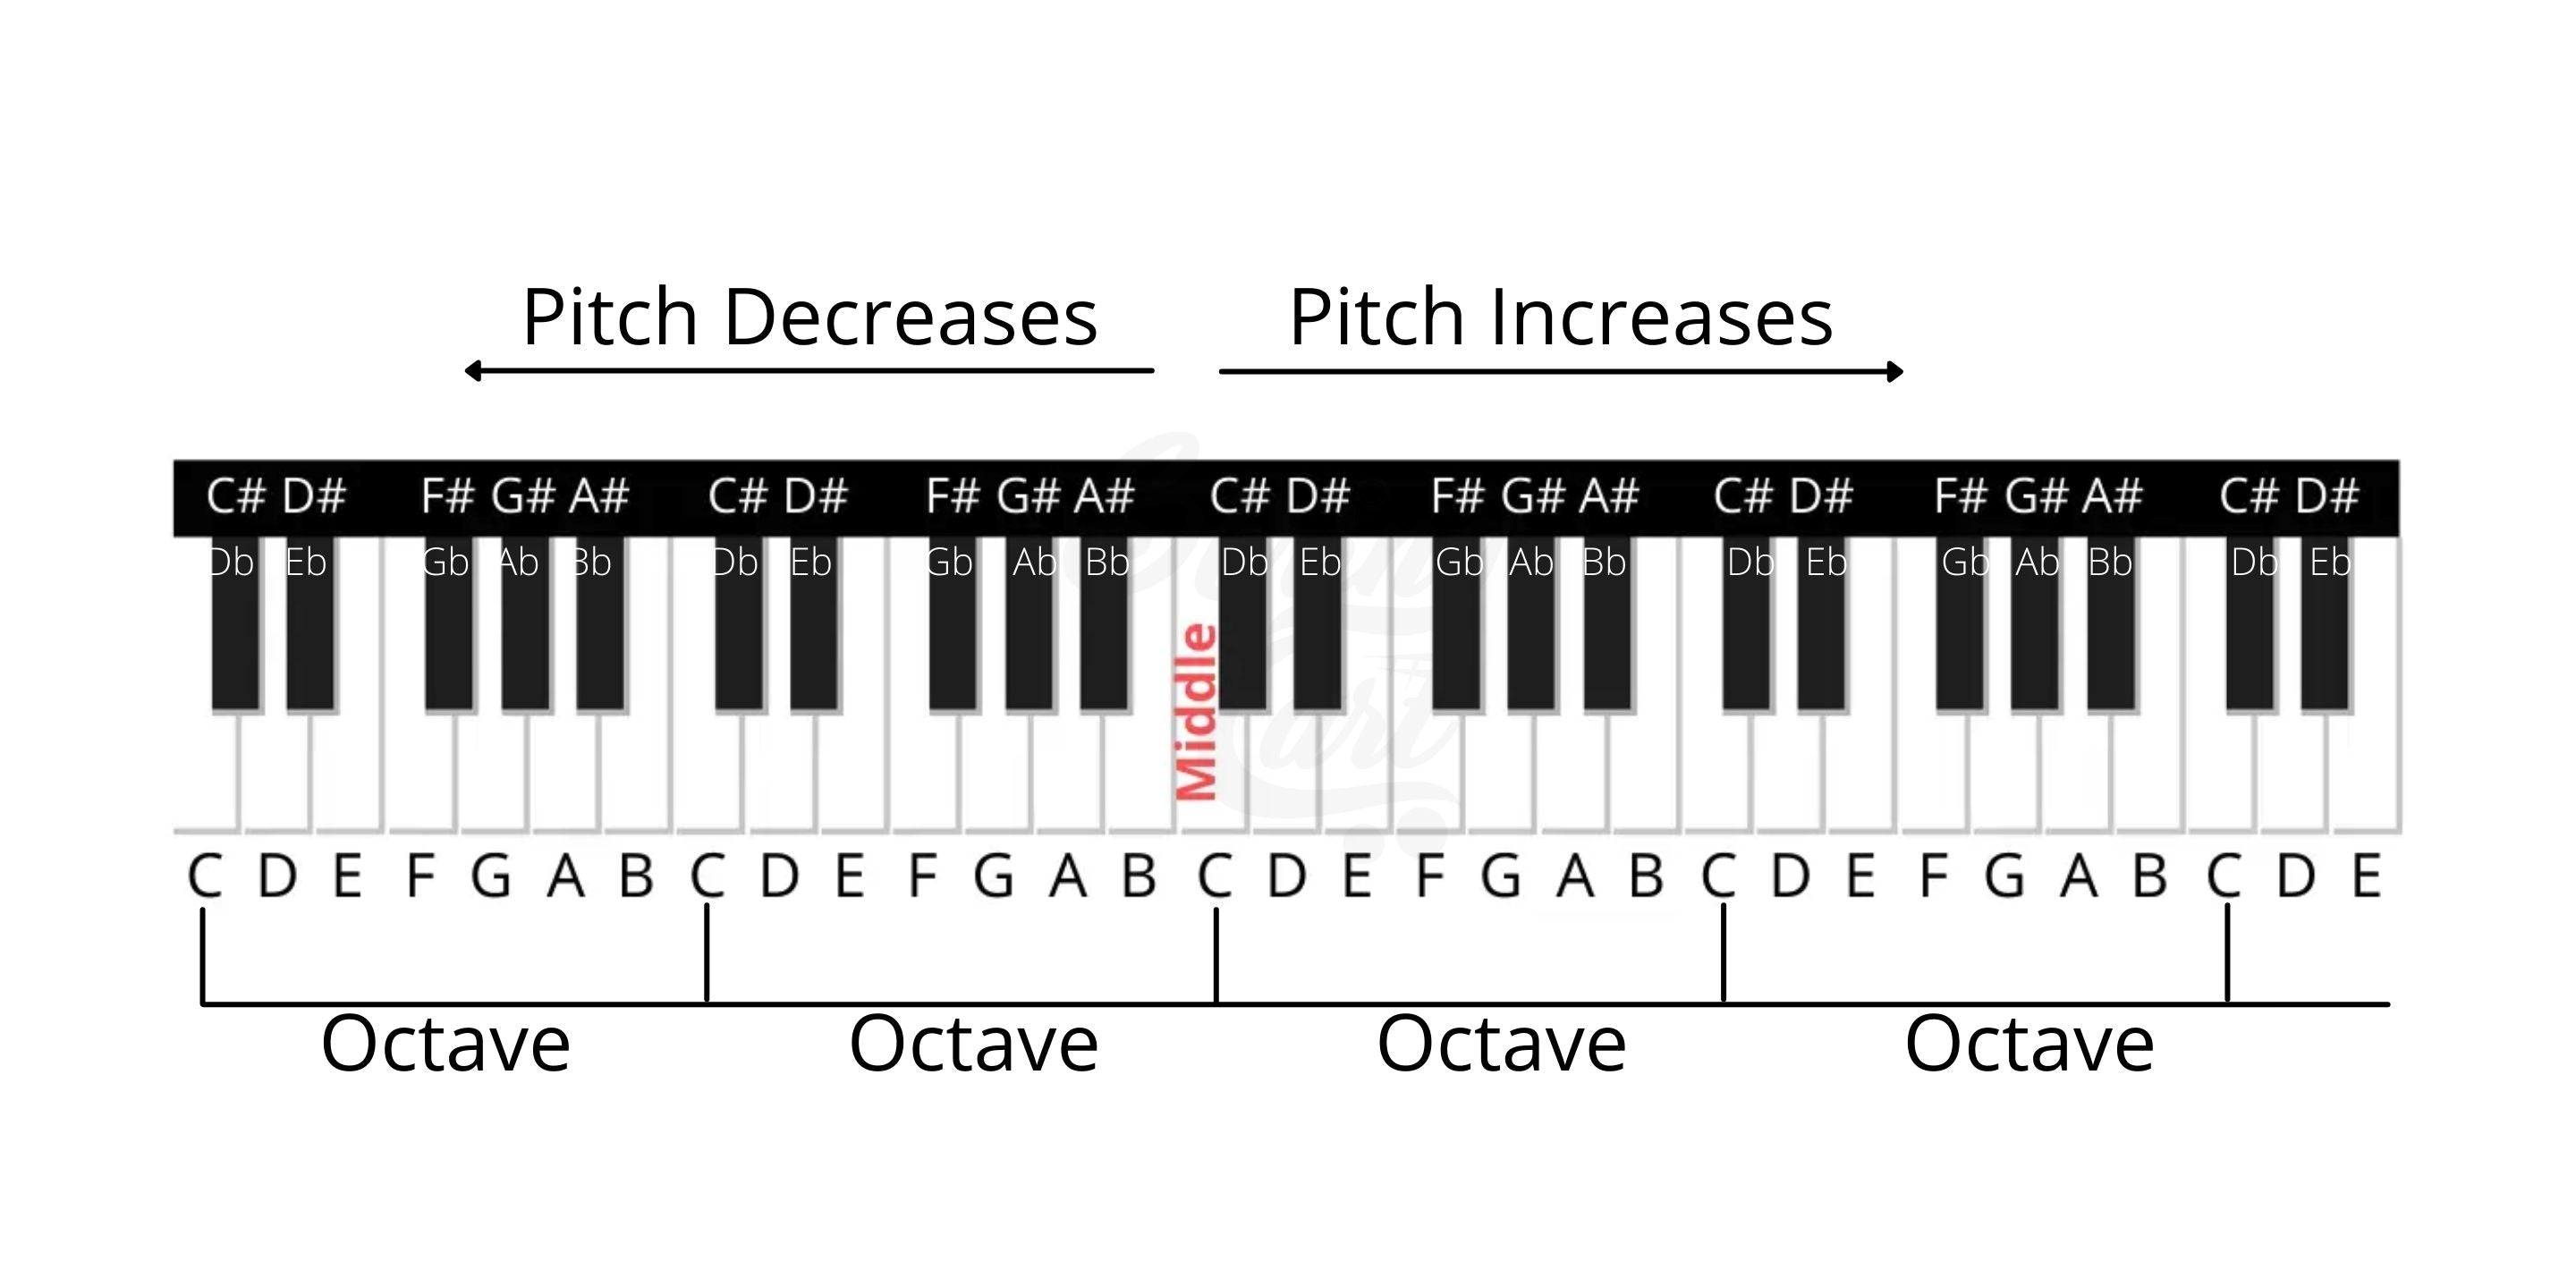 Piano Notes and Octaves explained - Image